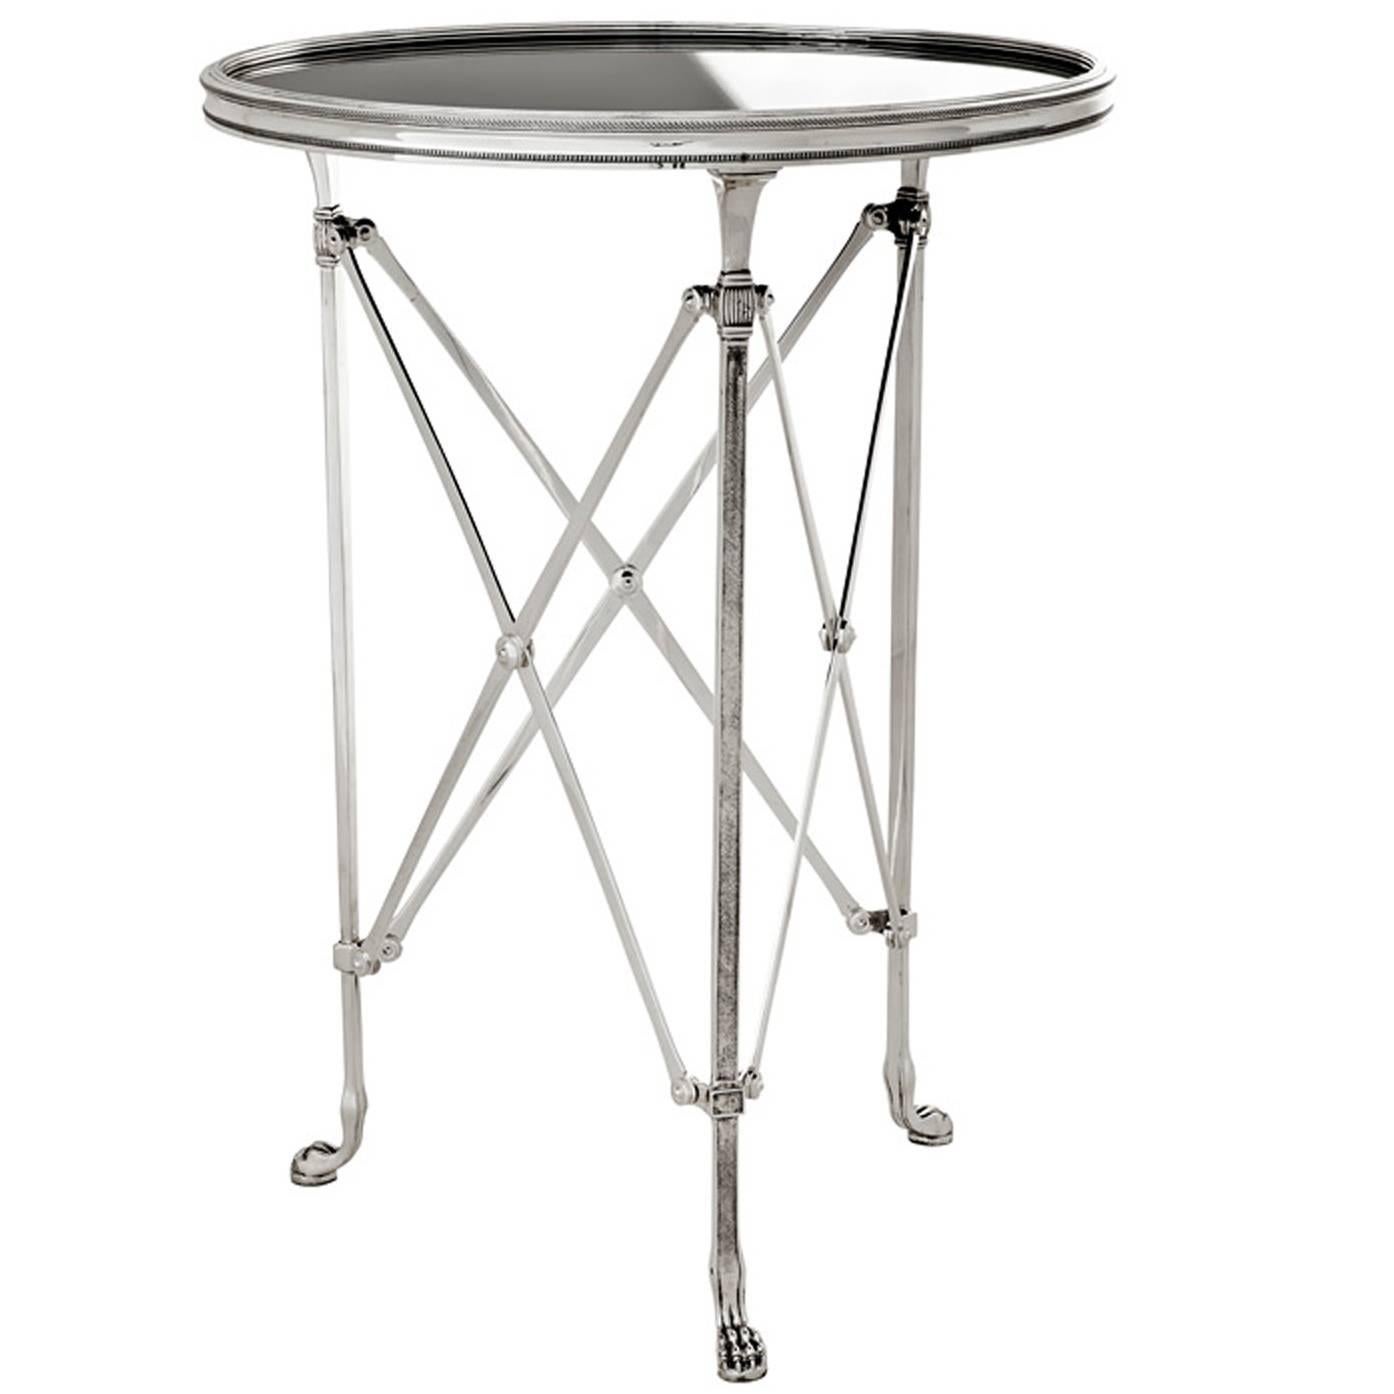 Lions Side Table in Antique Silver Plated or Bronze Finish